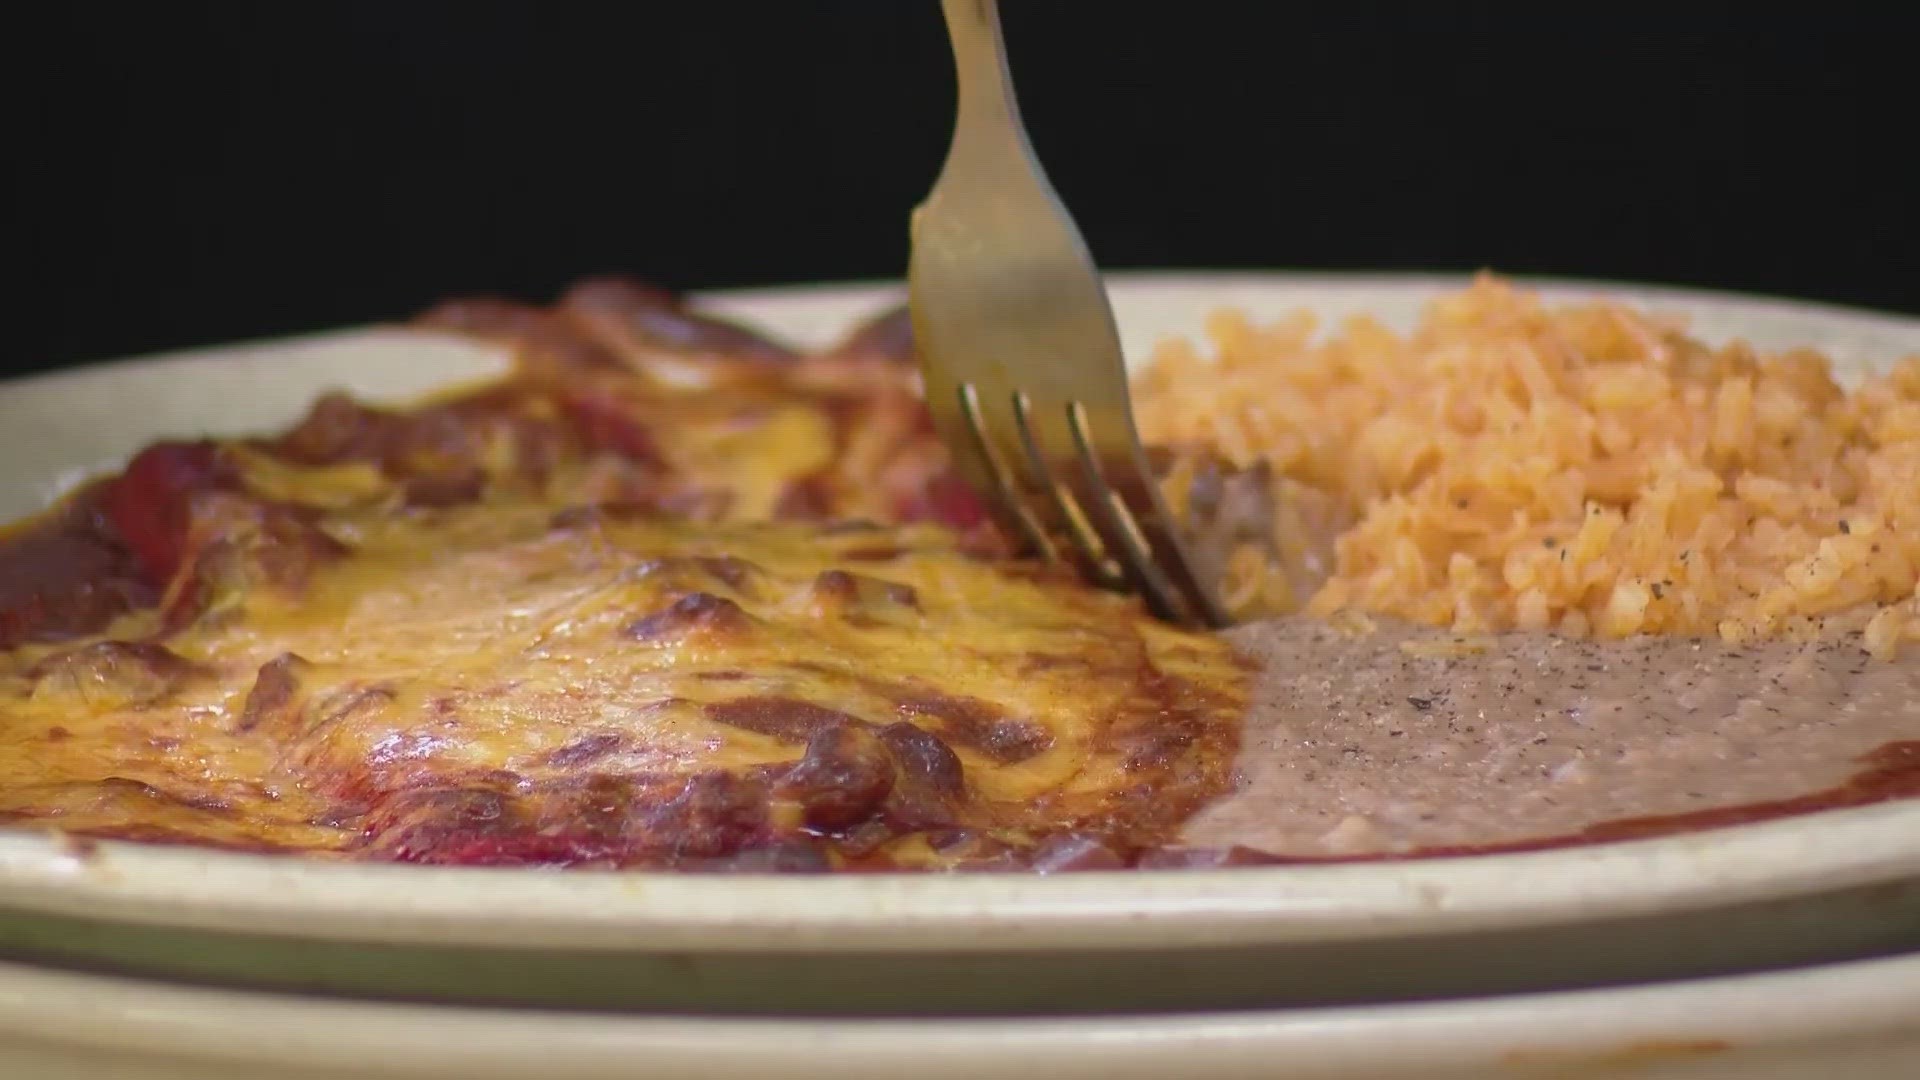 KENS 5 examines how the iconic cuisine has evolved over the years and what culinary experts predict for its future.